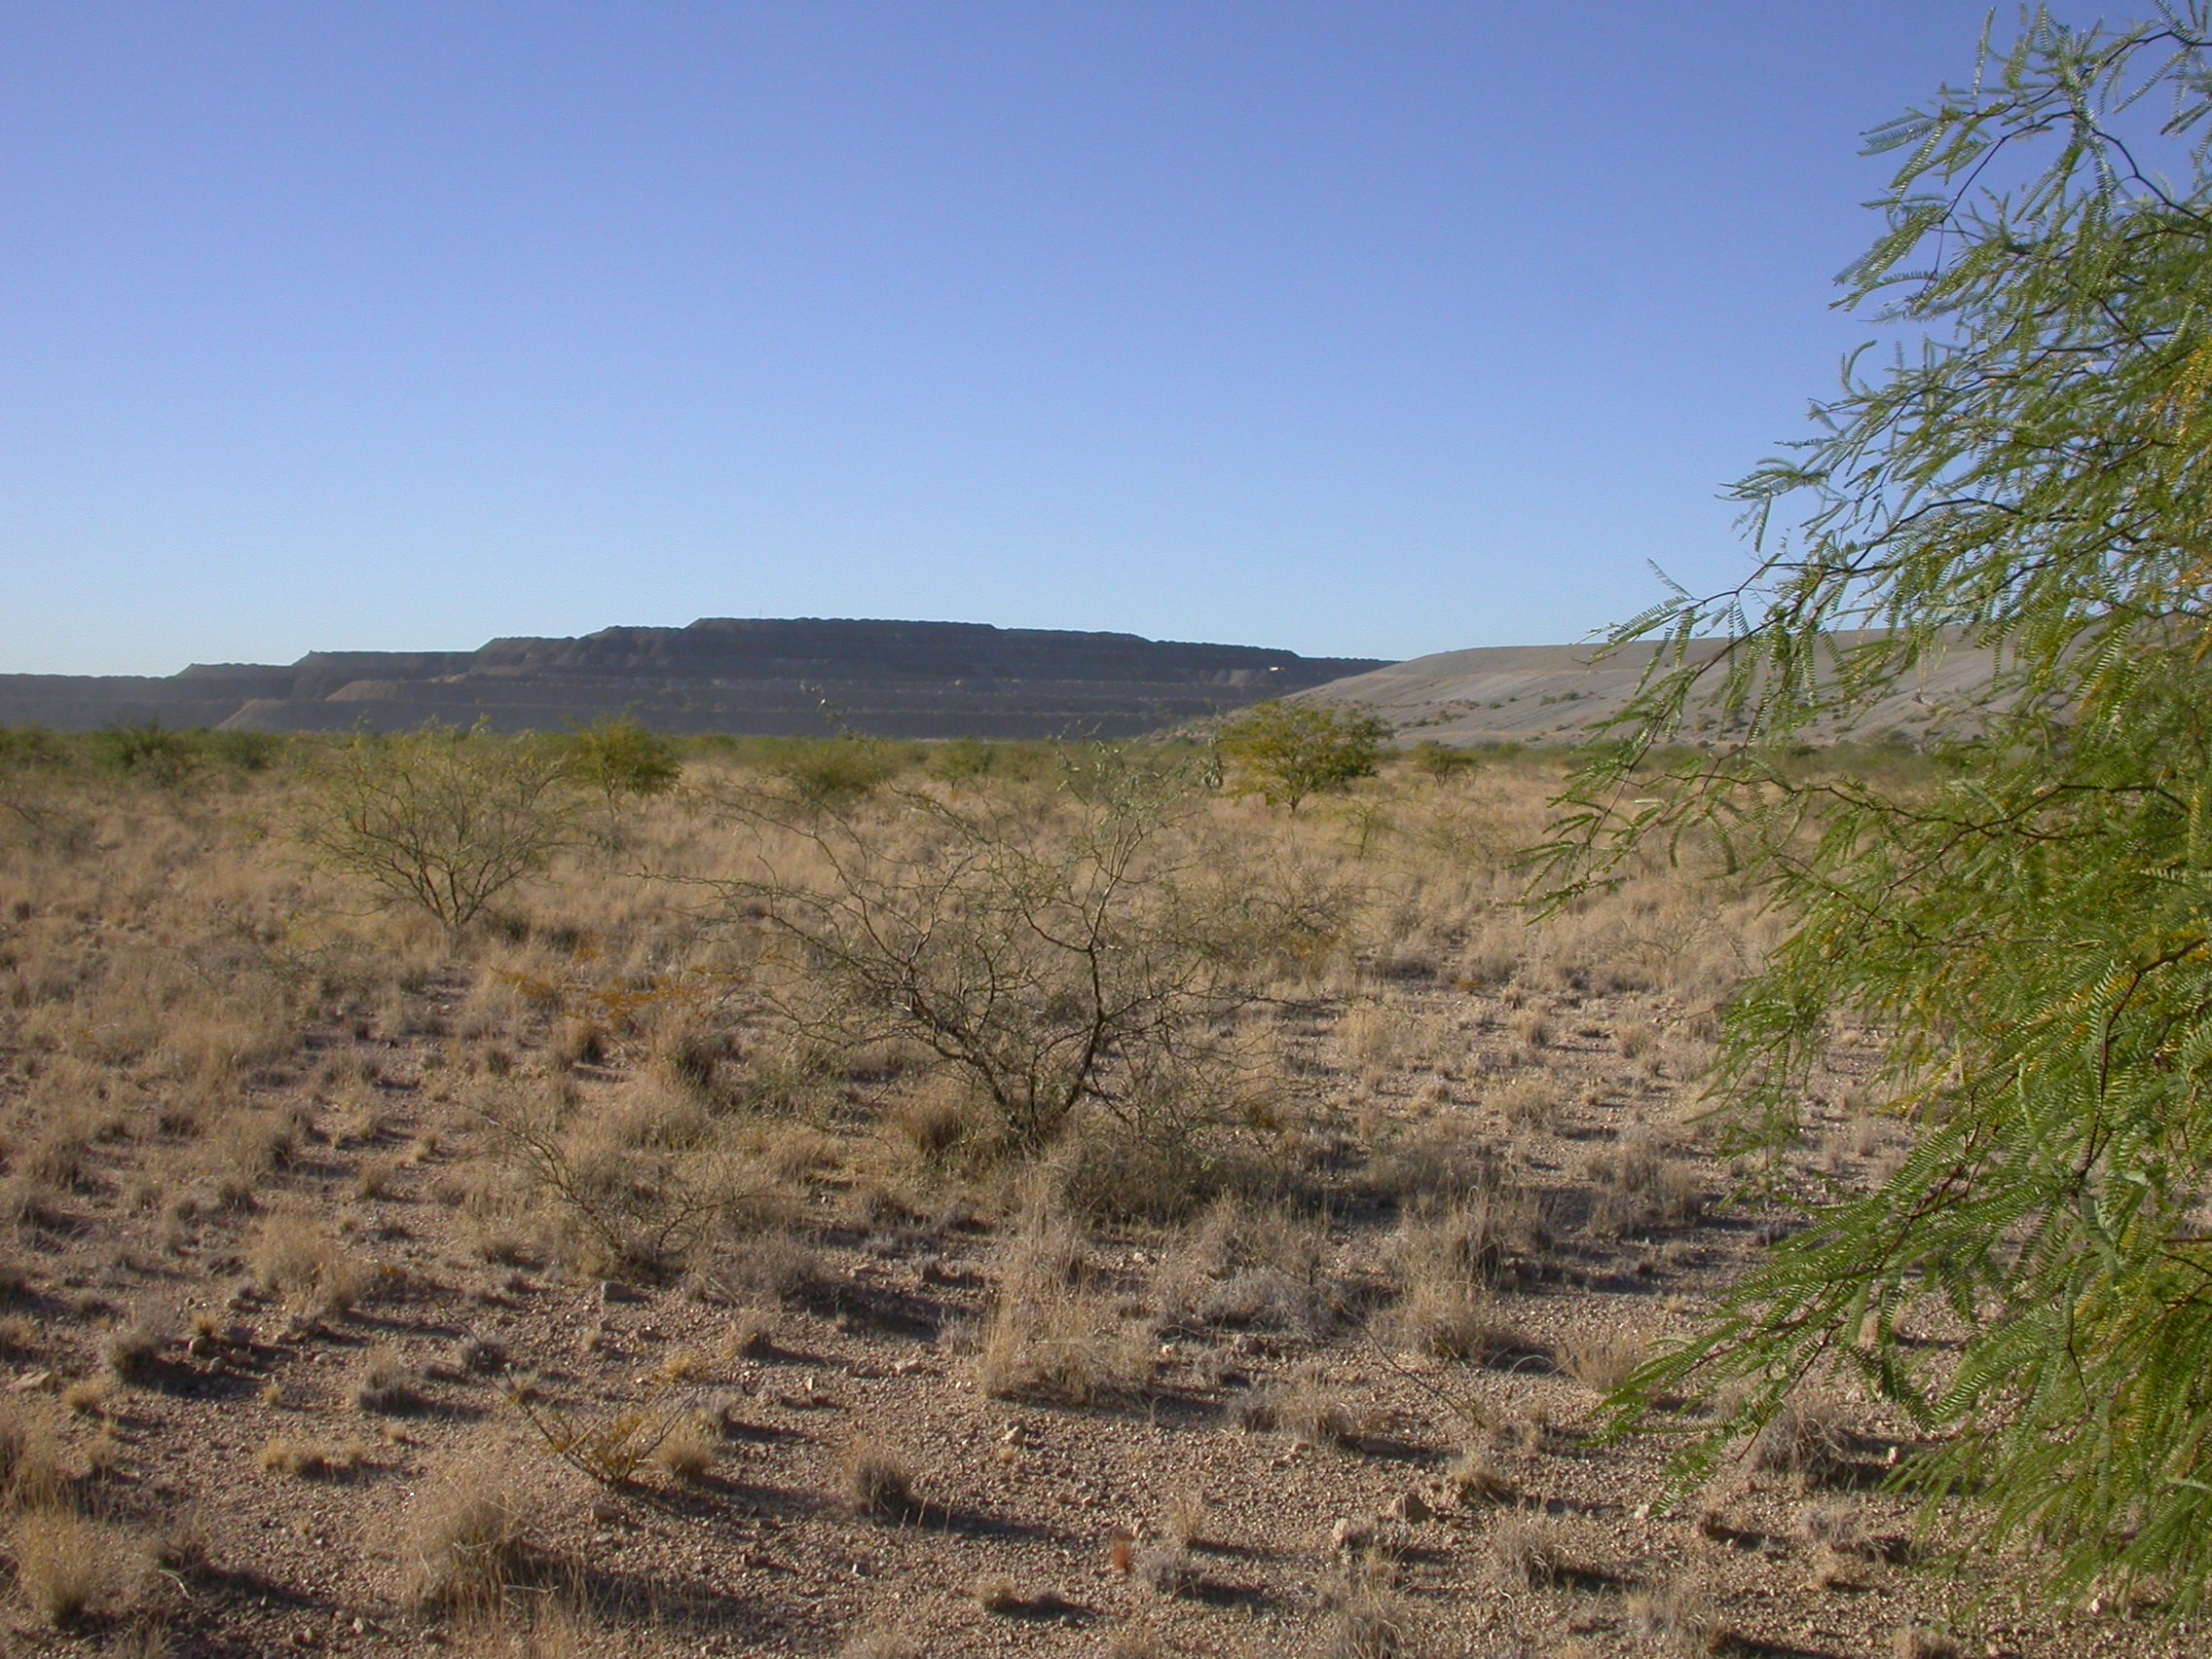 Photo of revegetated tailings facility with mesquites/acacias.